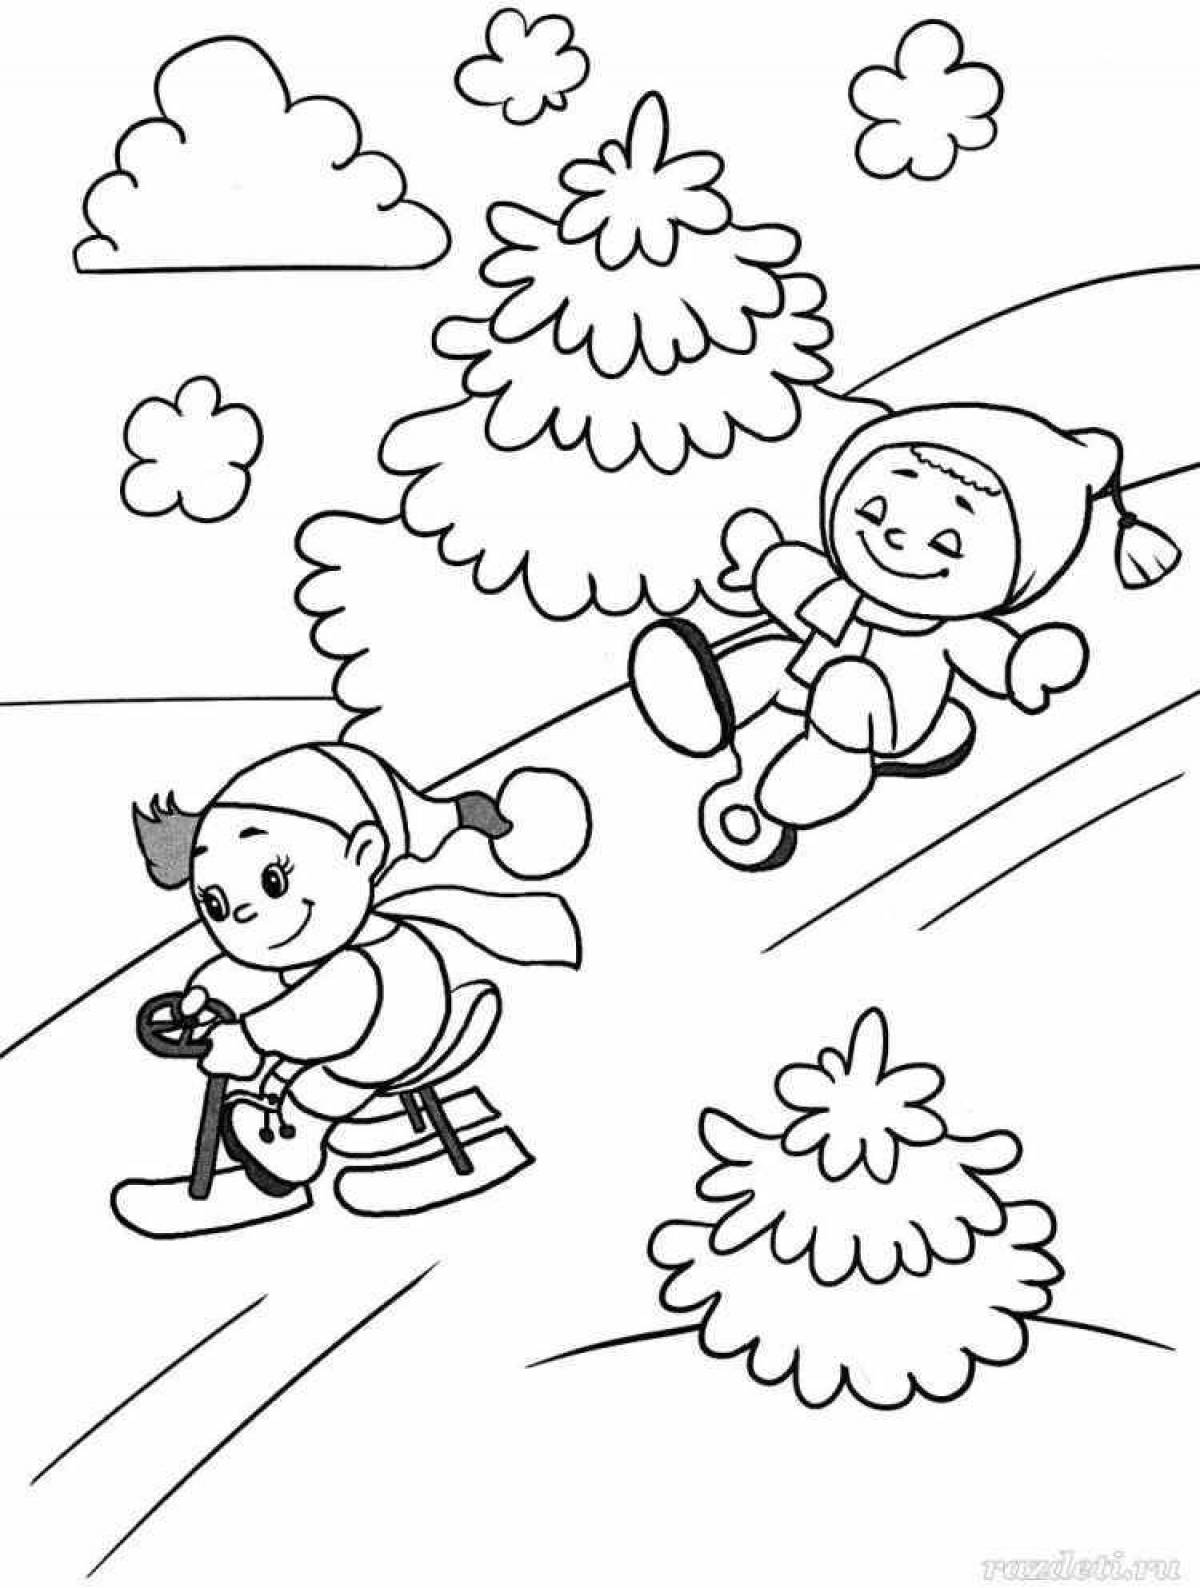 Sparkling coloring book for children in winter